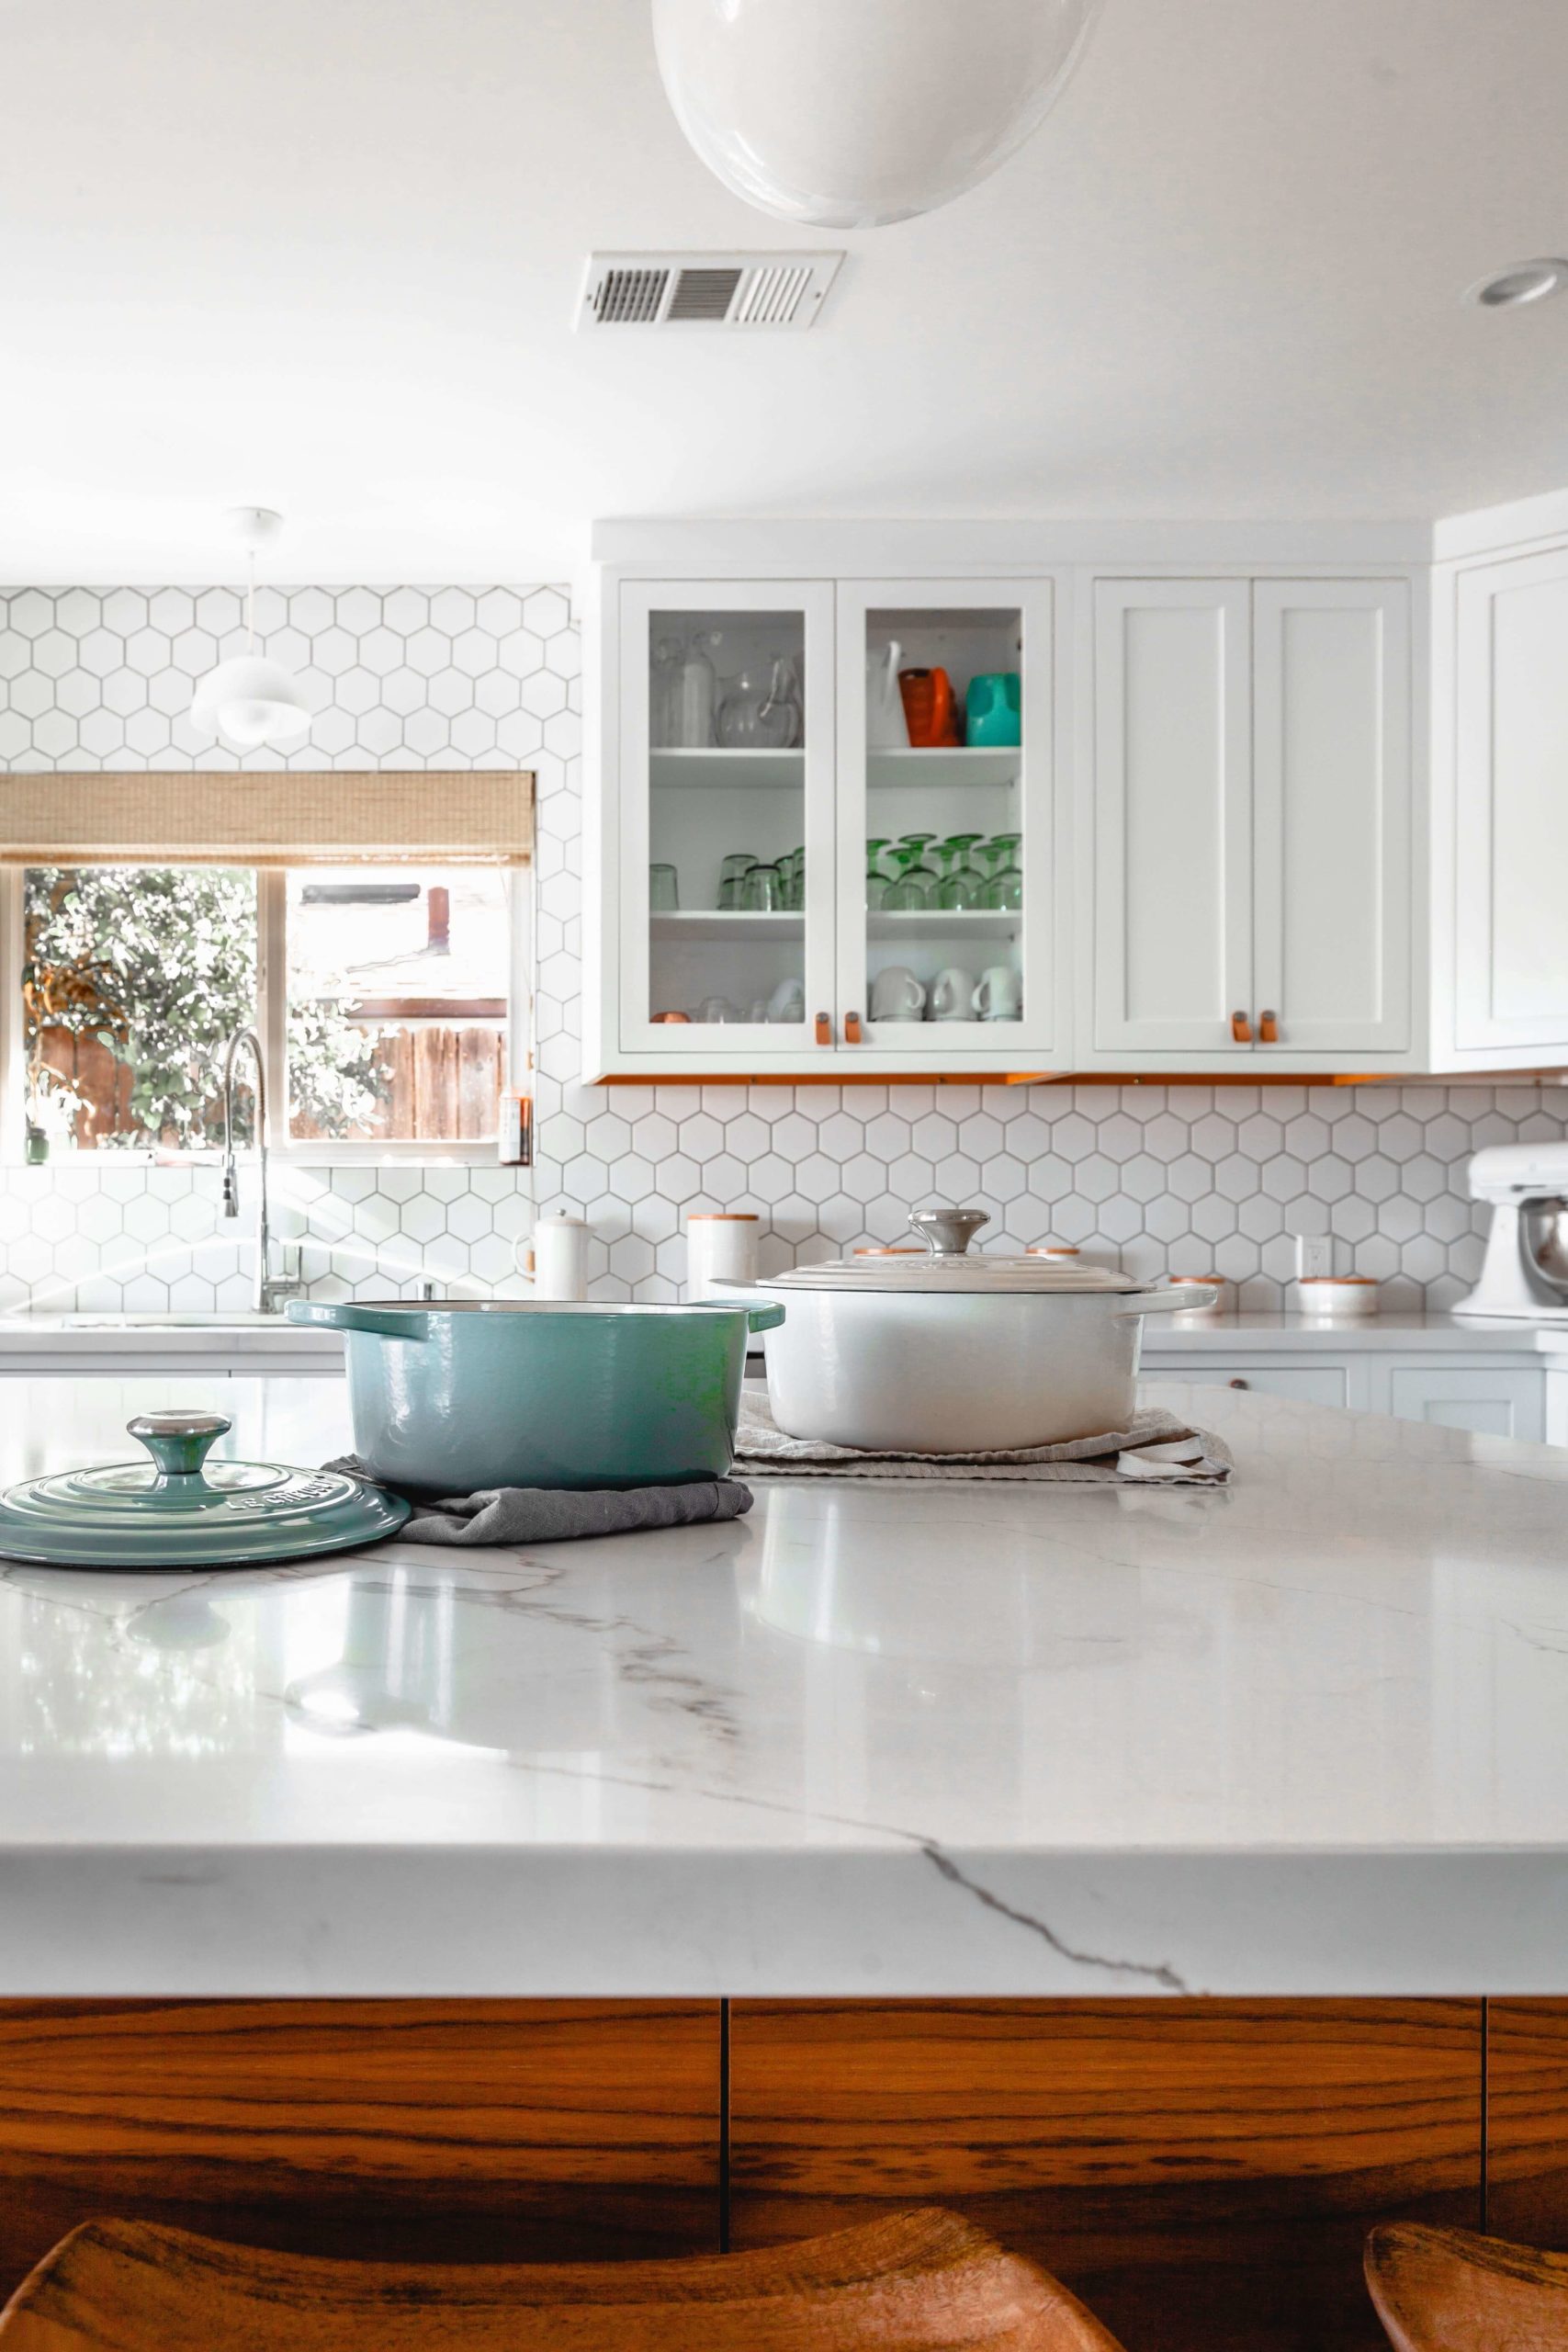 Remodeling your kitchen with the least fuss